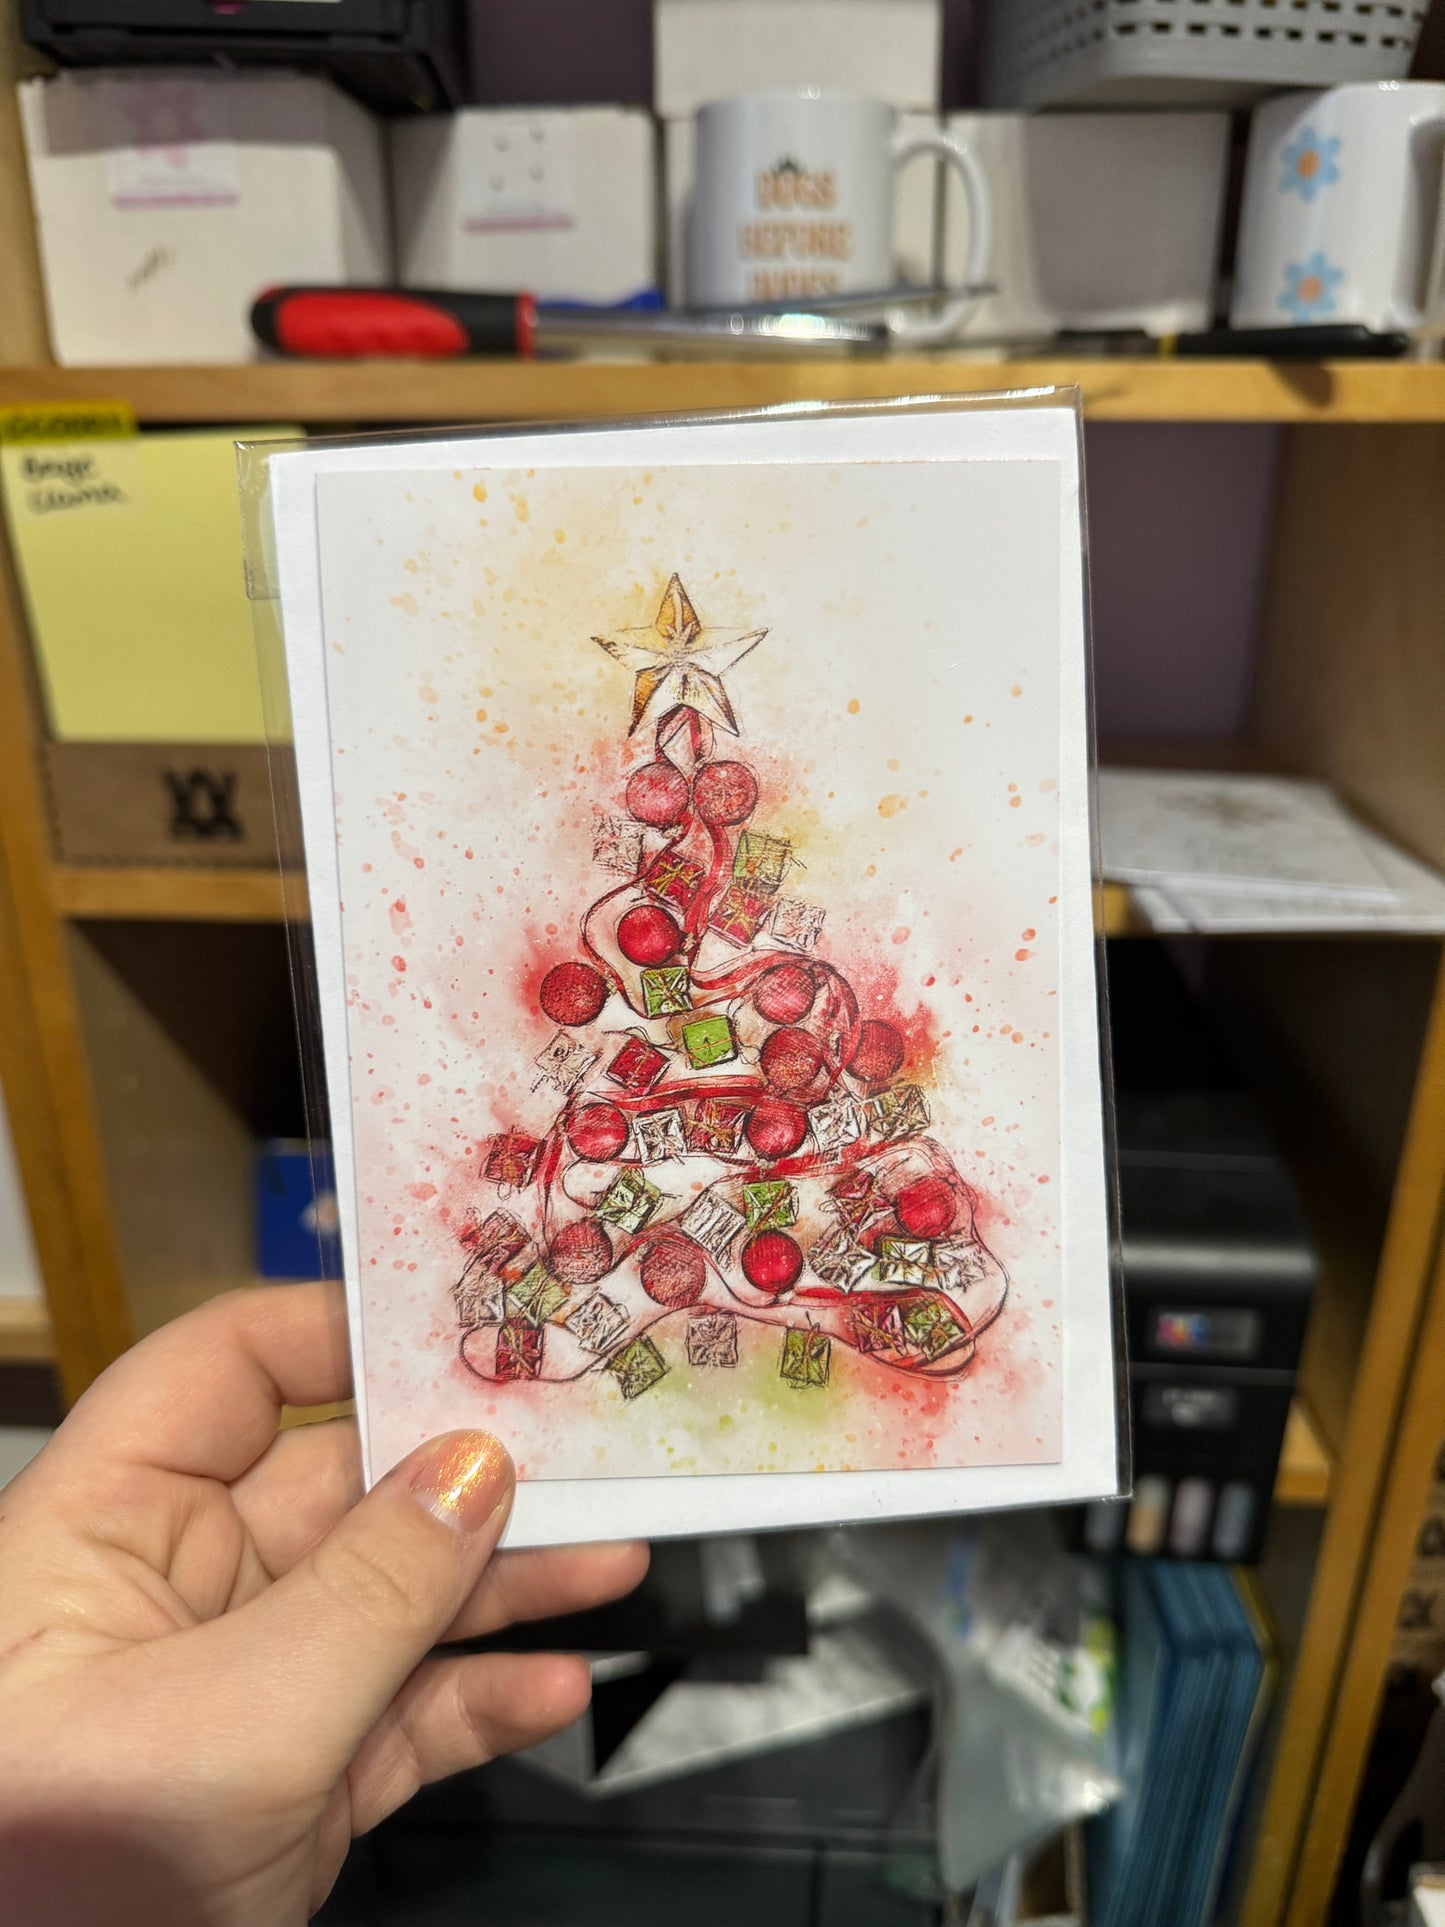 Discontinued Greeting Cards - Limited Stock Remaining!